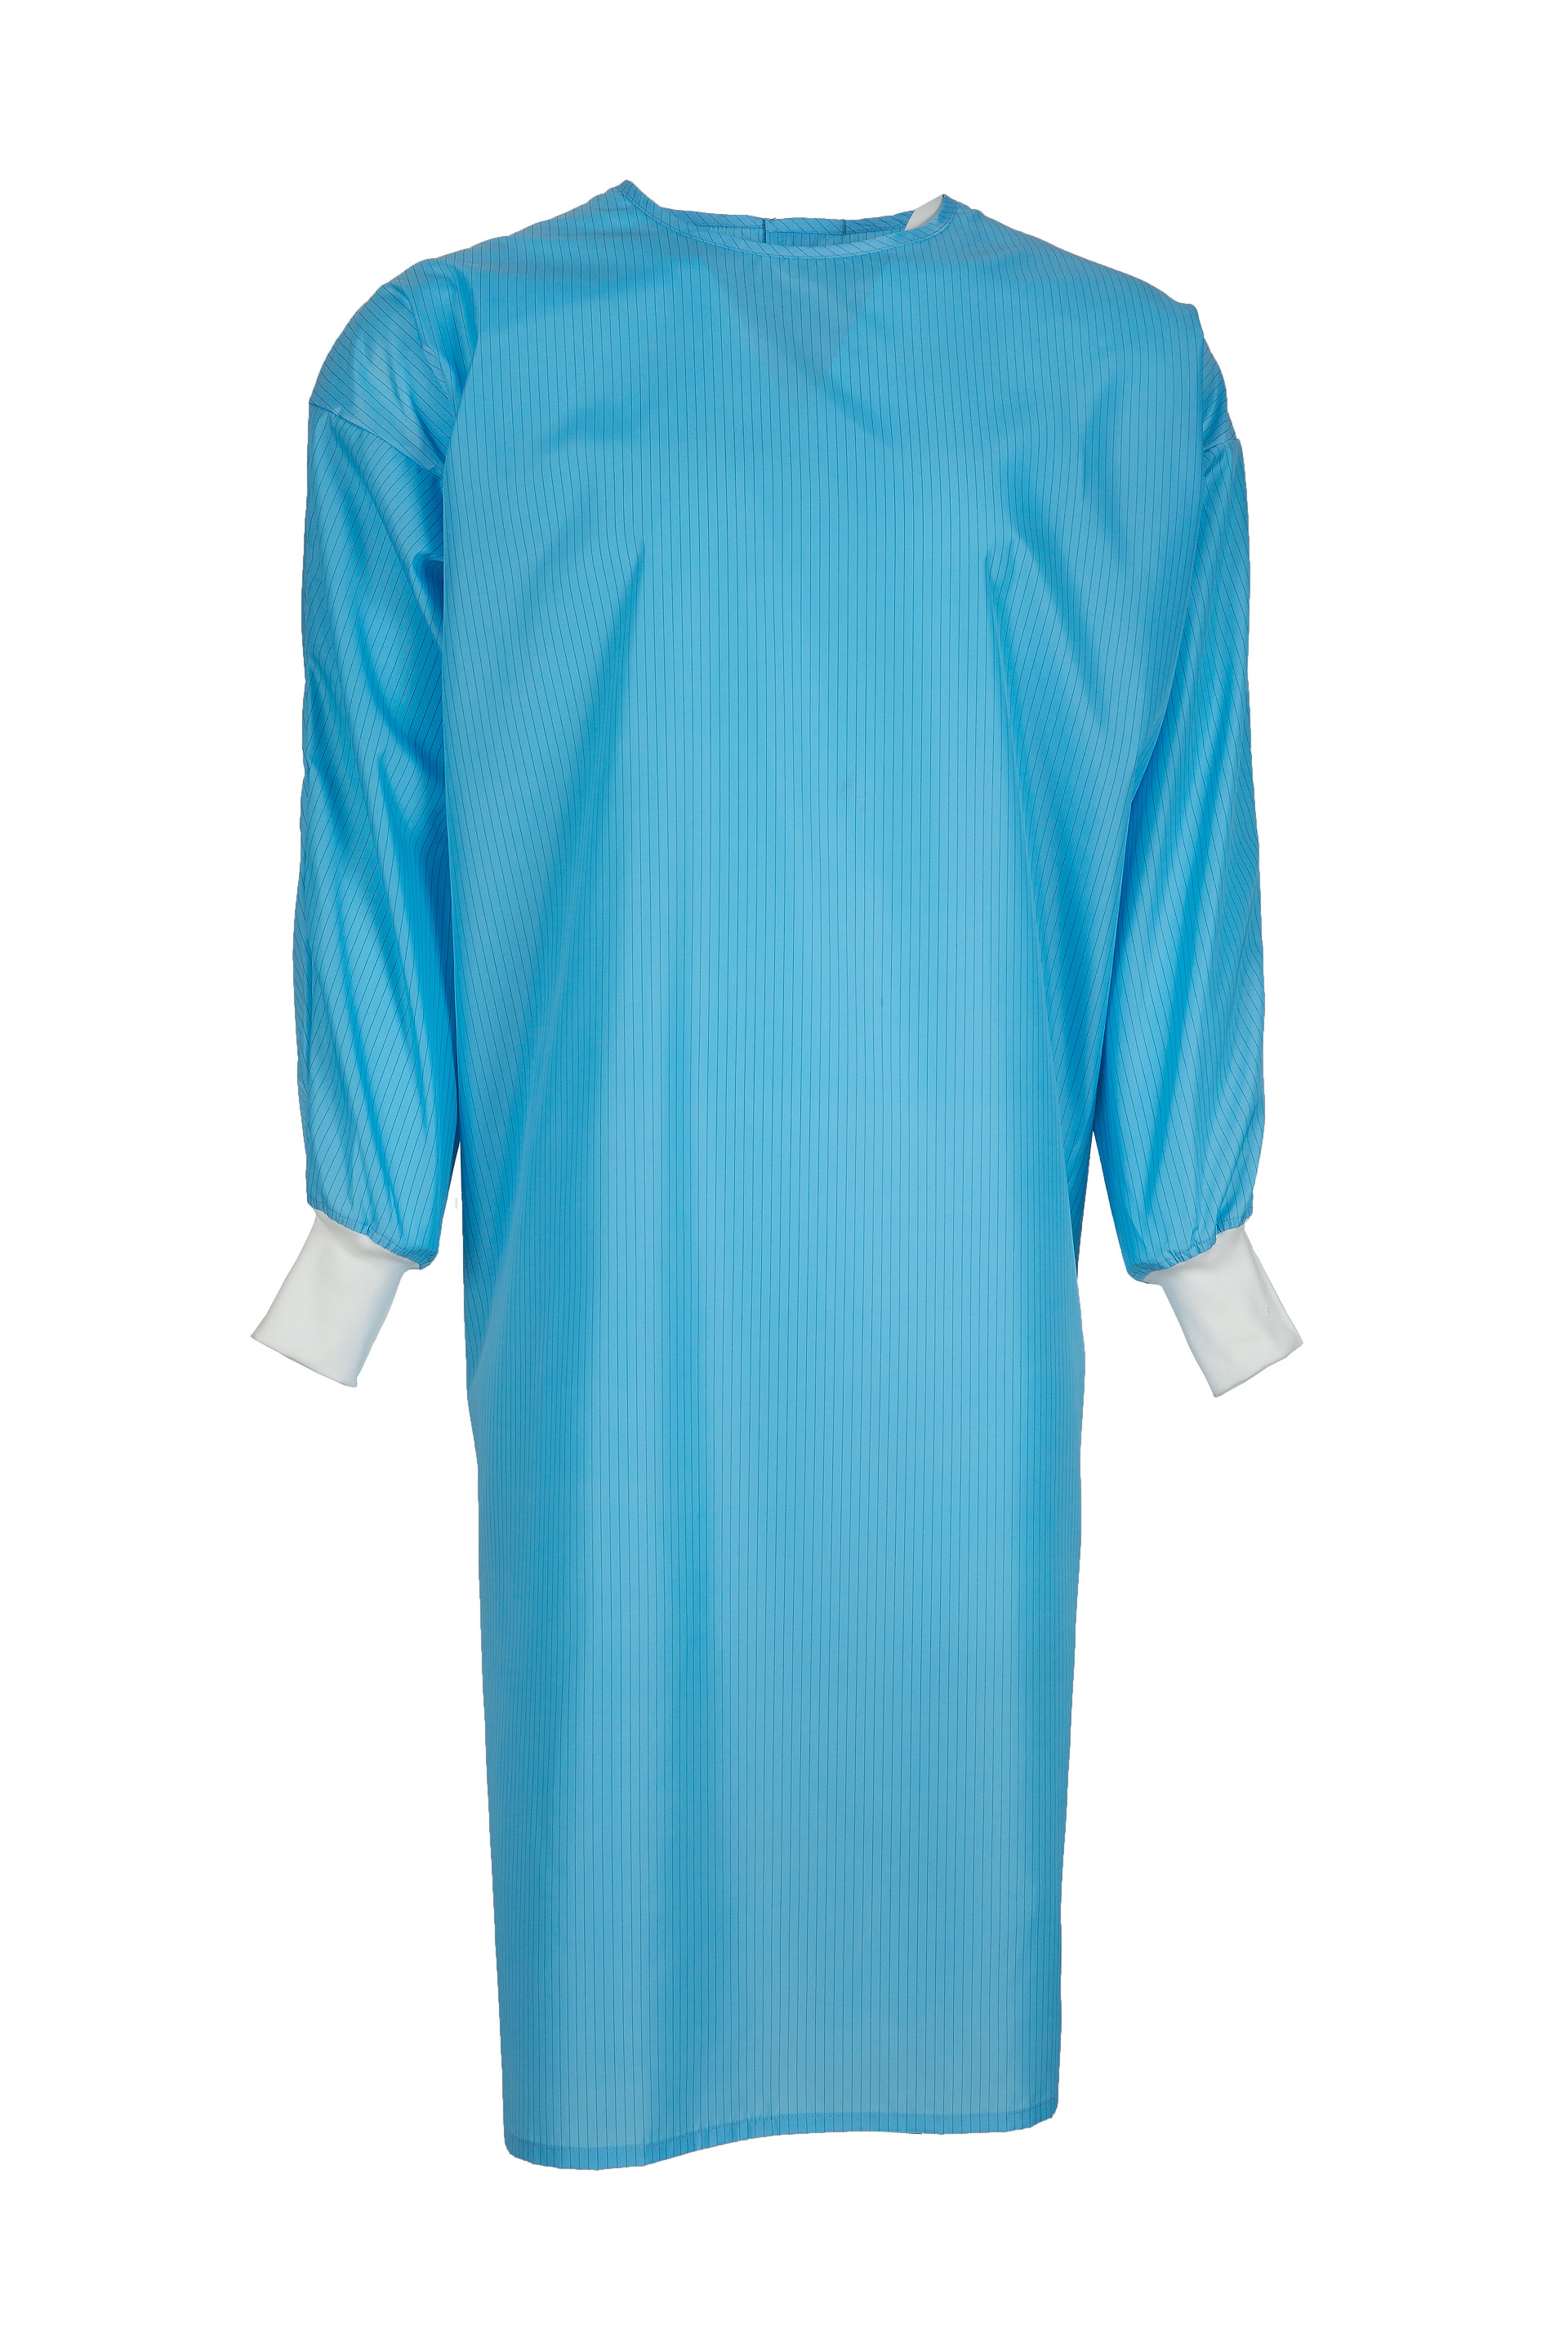 ISO4758 Level 2 Reusable Isolation Gowns - Blue